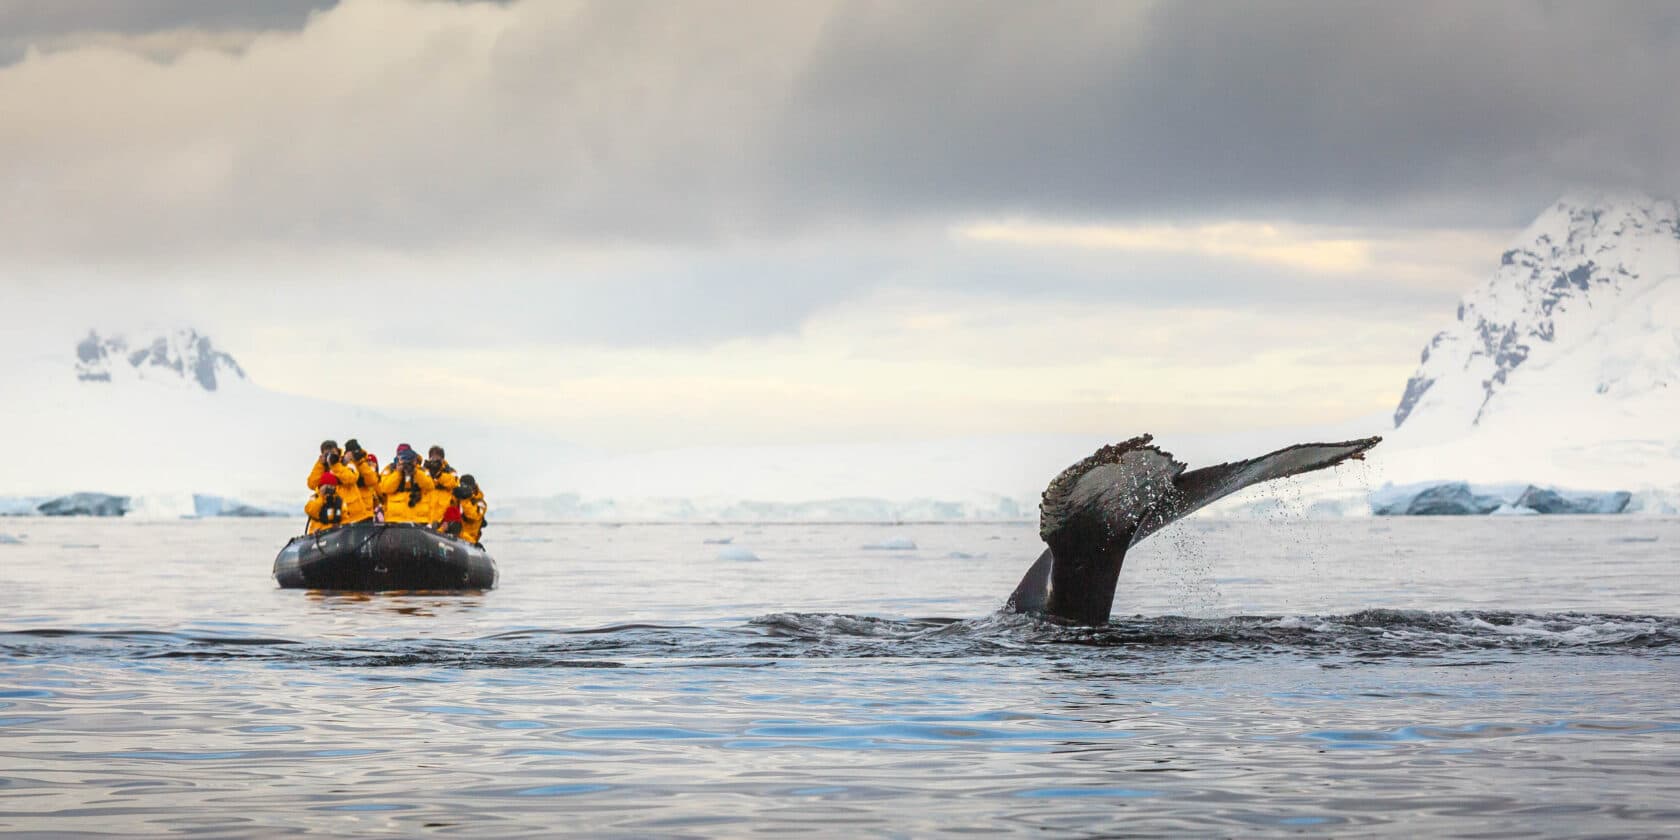 A group of tourists on a boat, watching a whale.